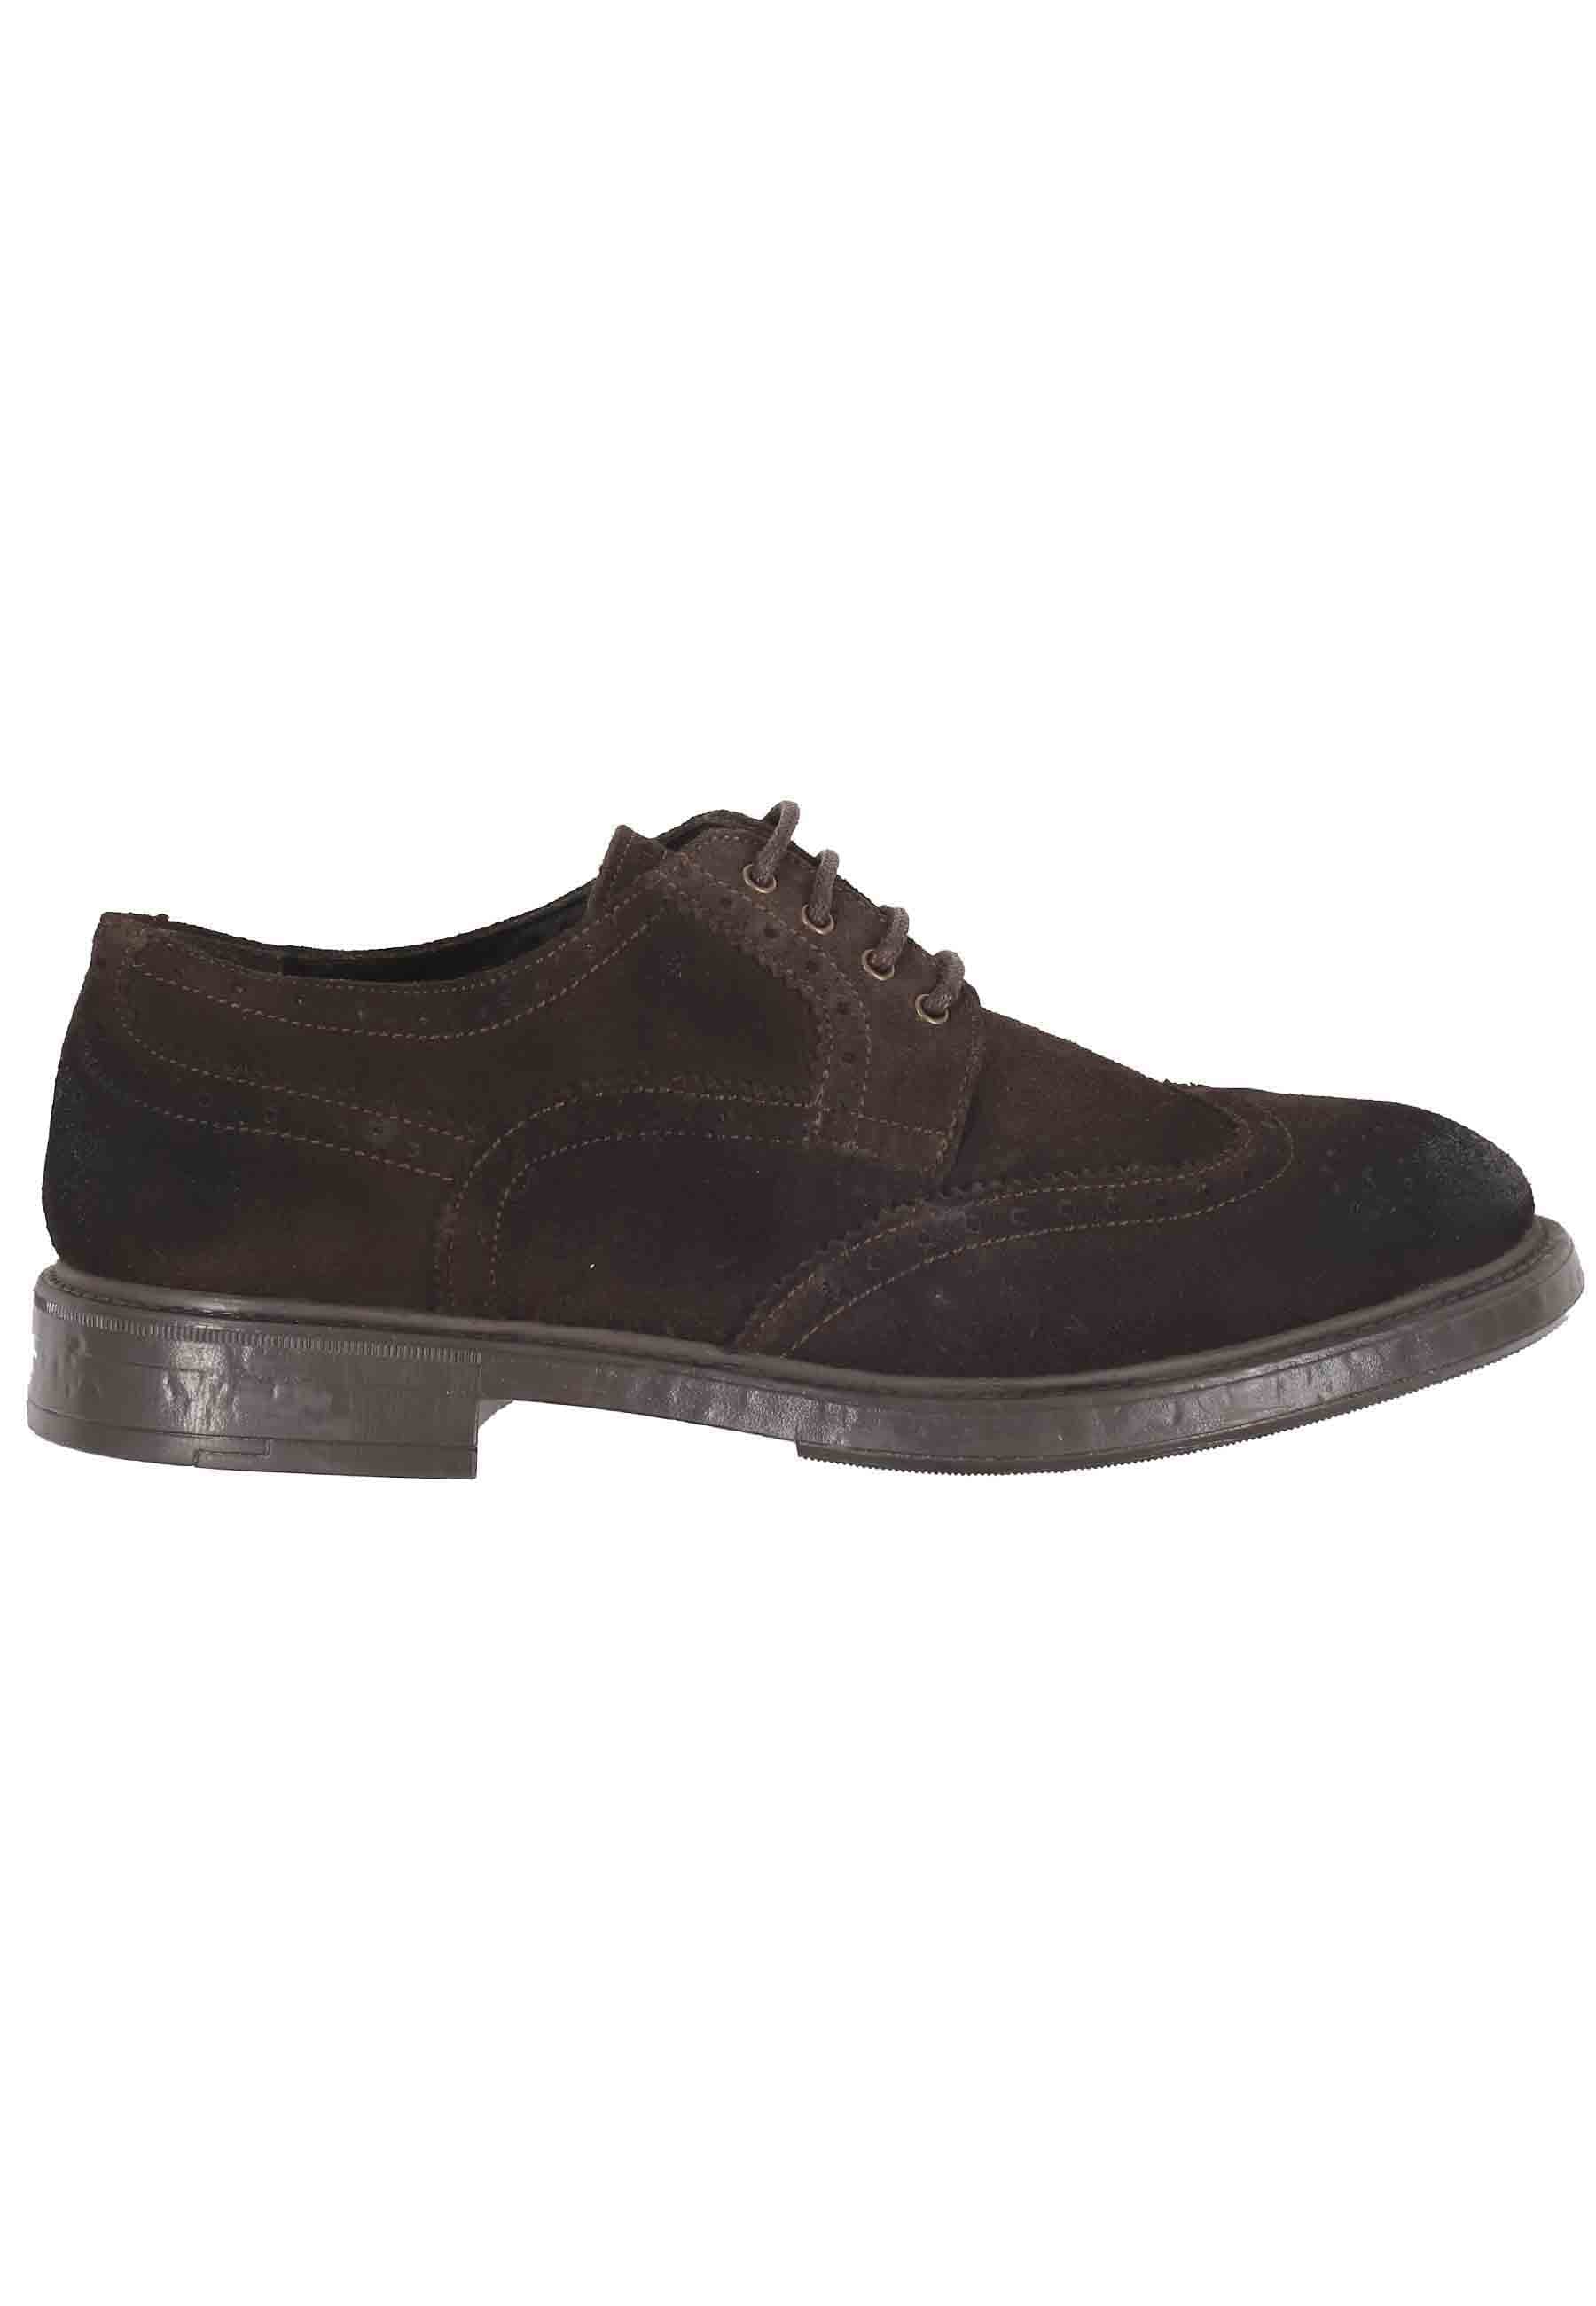 Men's lace-ups in dark brown suede with English stitching and rubber sole